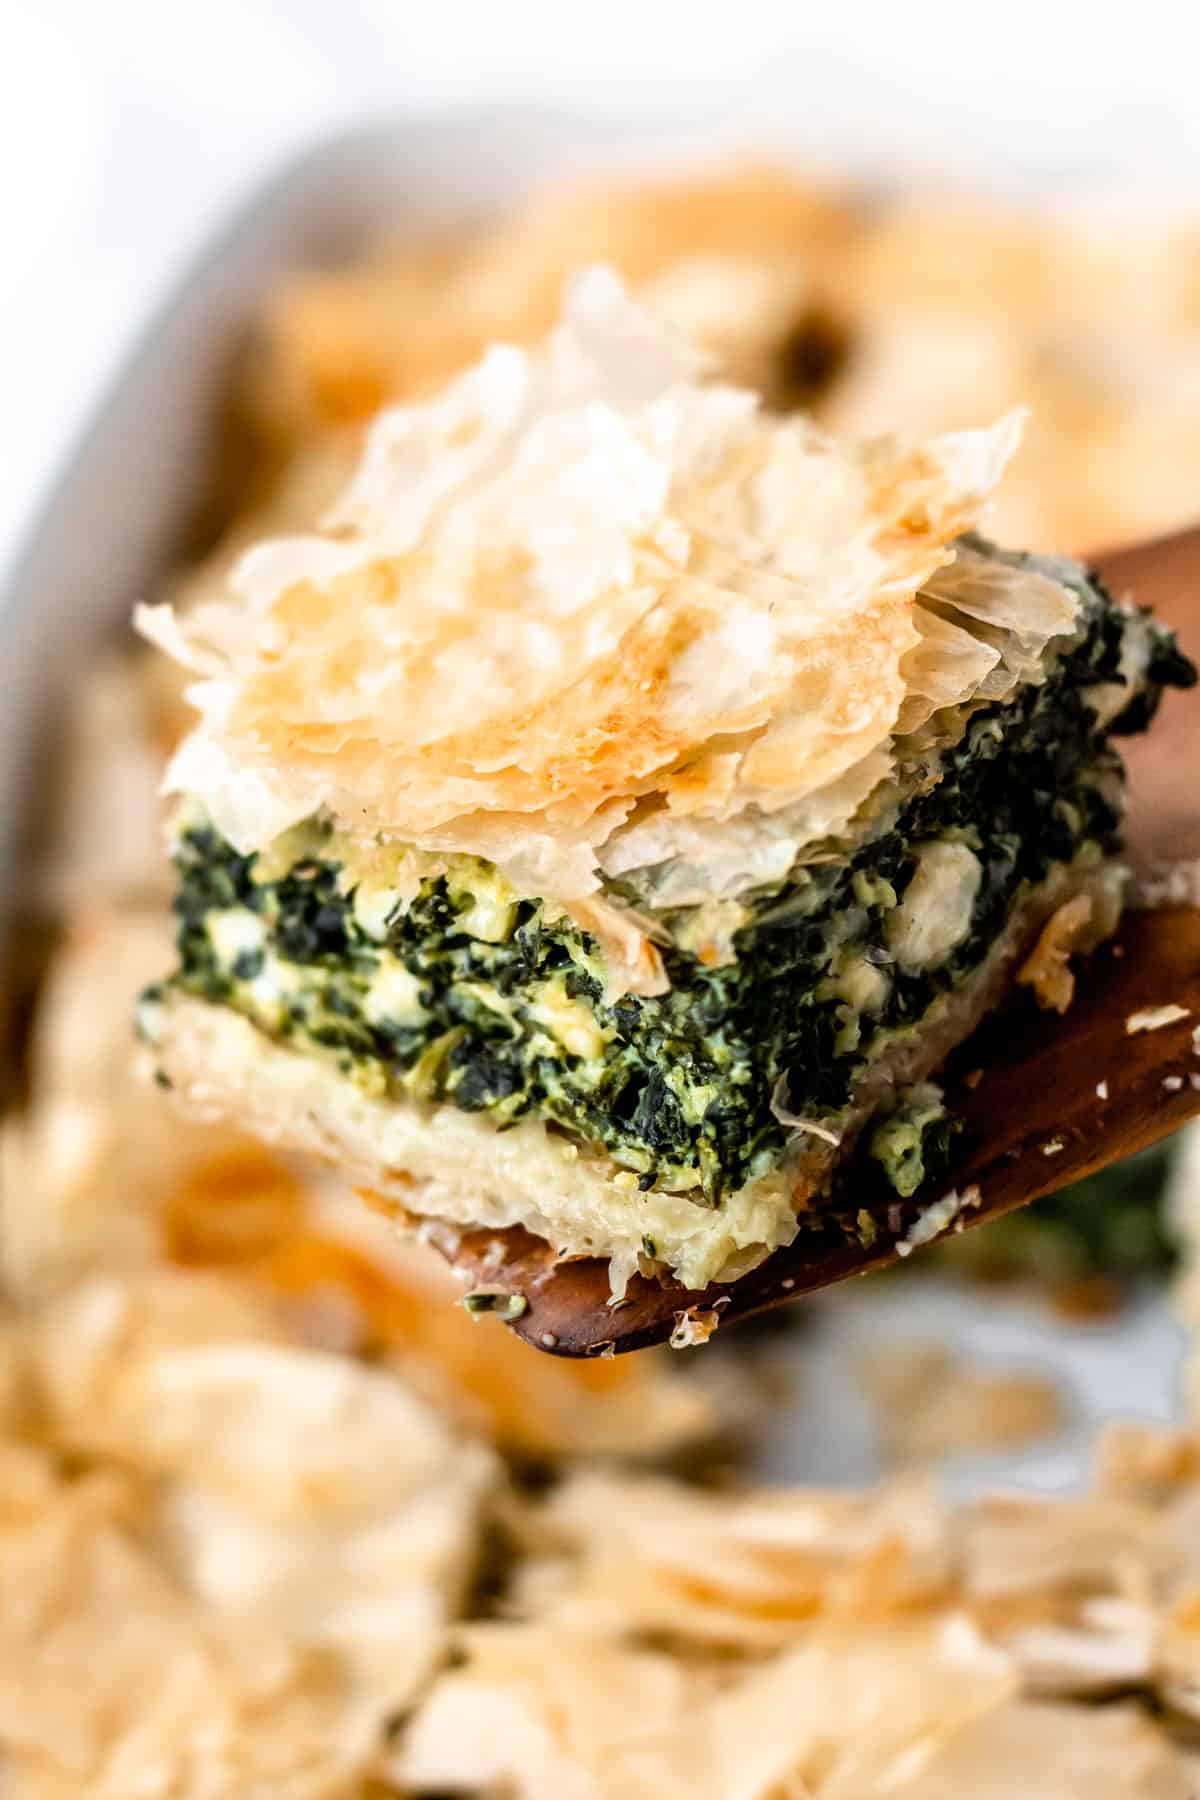 A serving of spanakopita being lifted up over the casserole dish with a server.